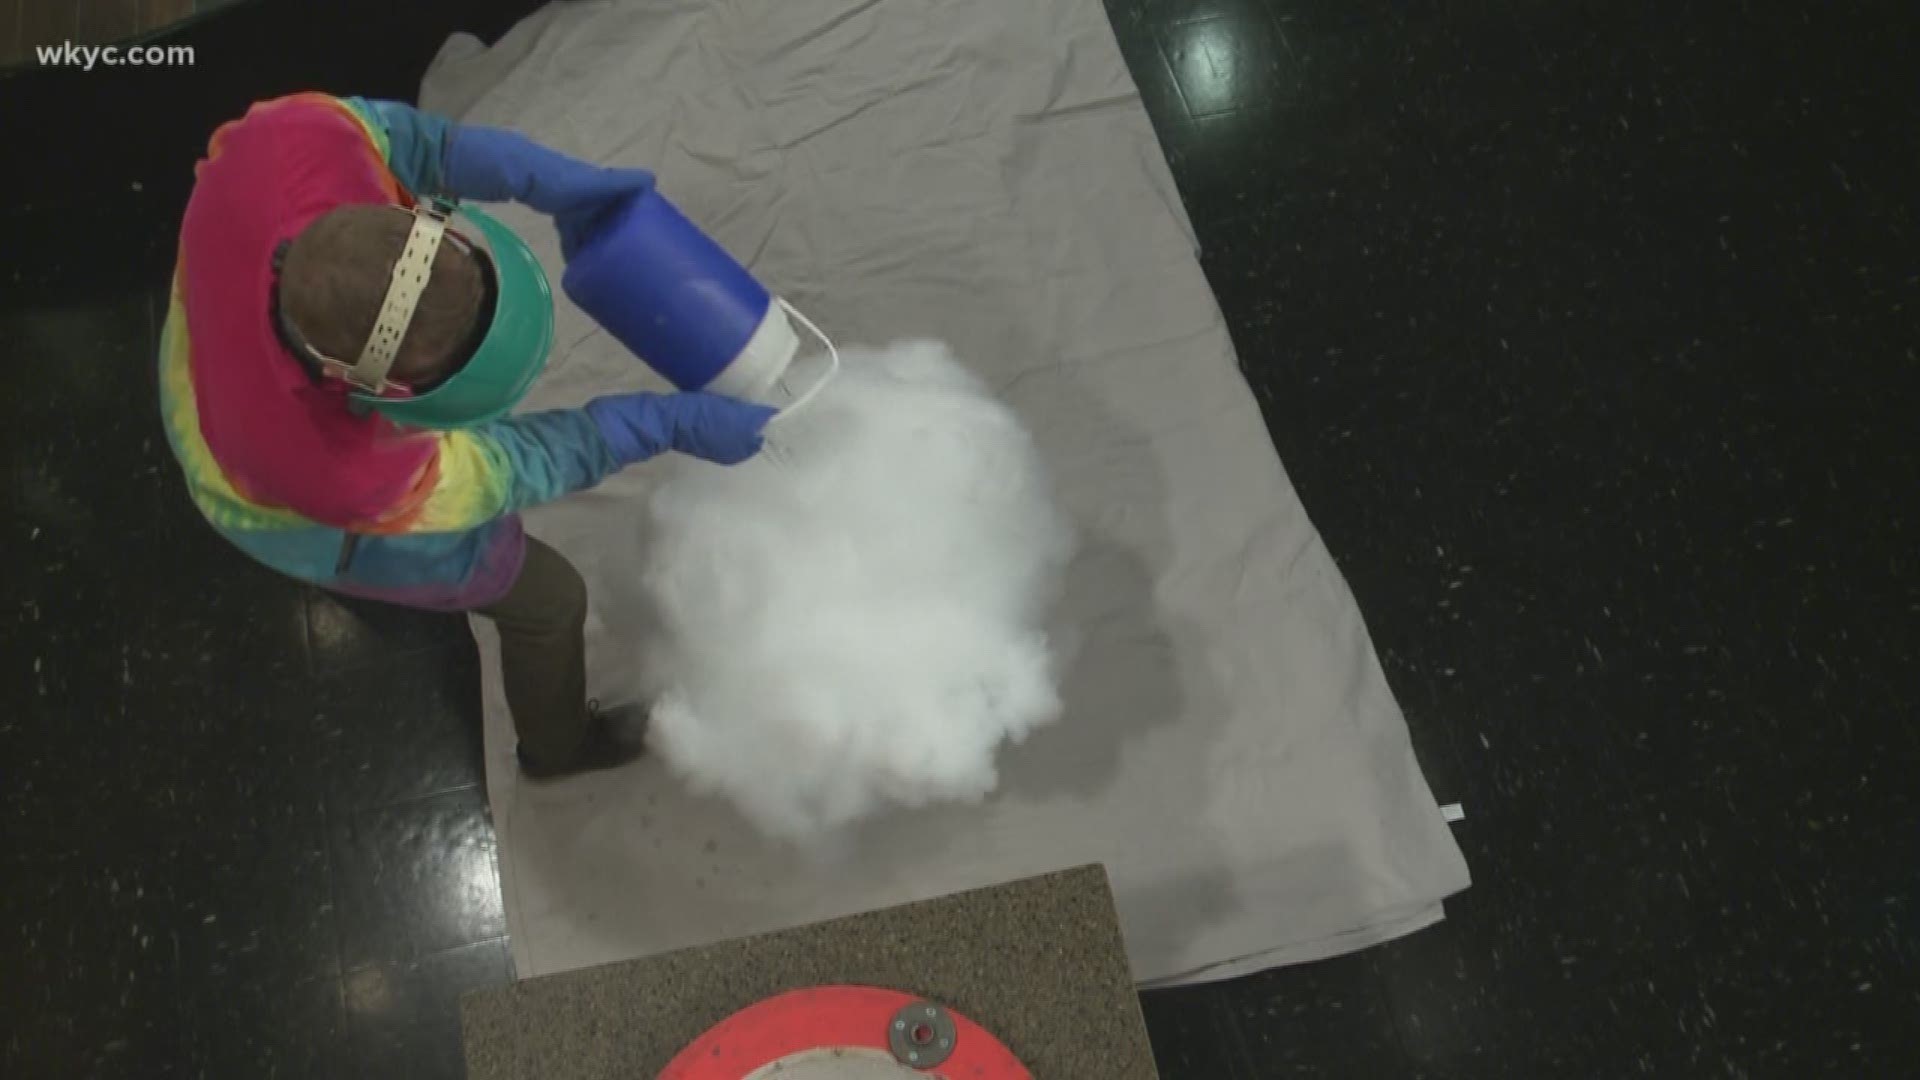 During Friday's Donovan Live, Mike Polk Jr. learned how clouds are formed with Betsy Kling and Robyn Kaltenbach from the Great Lakes Science Center